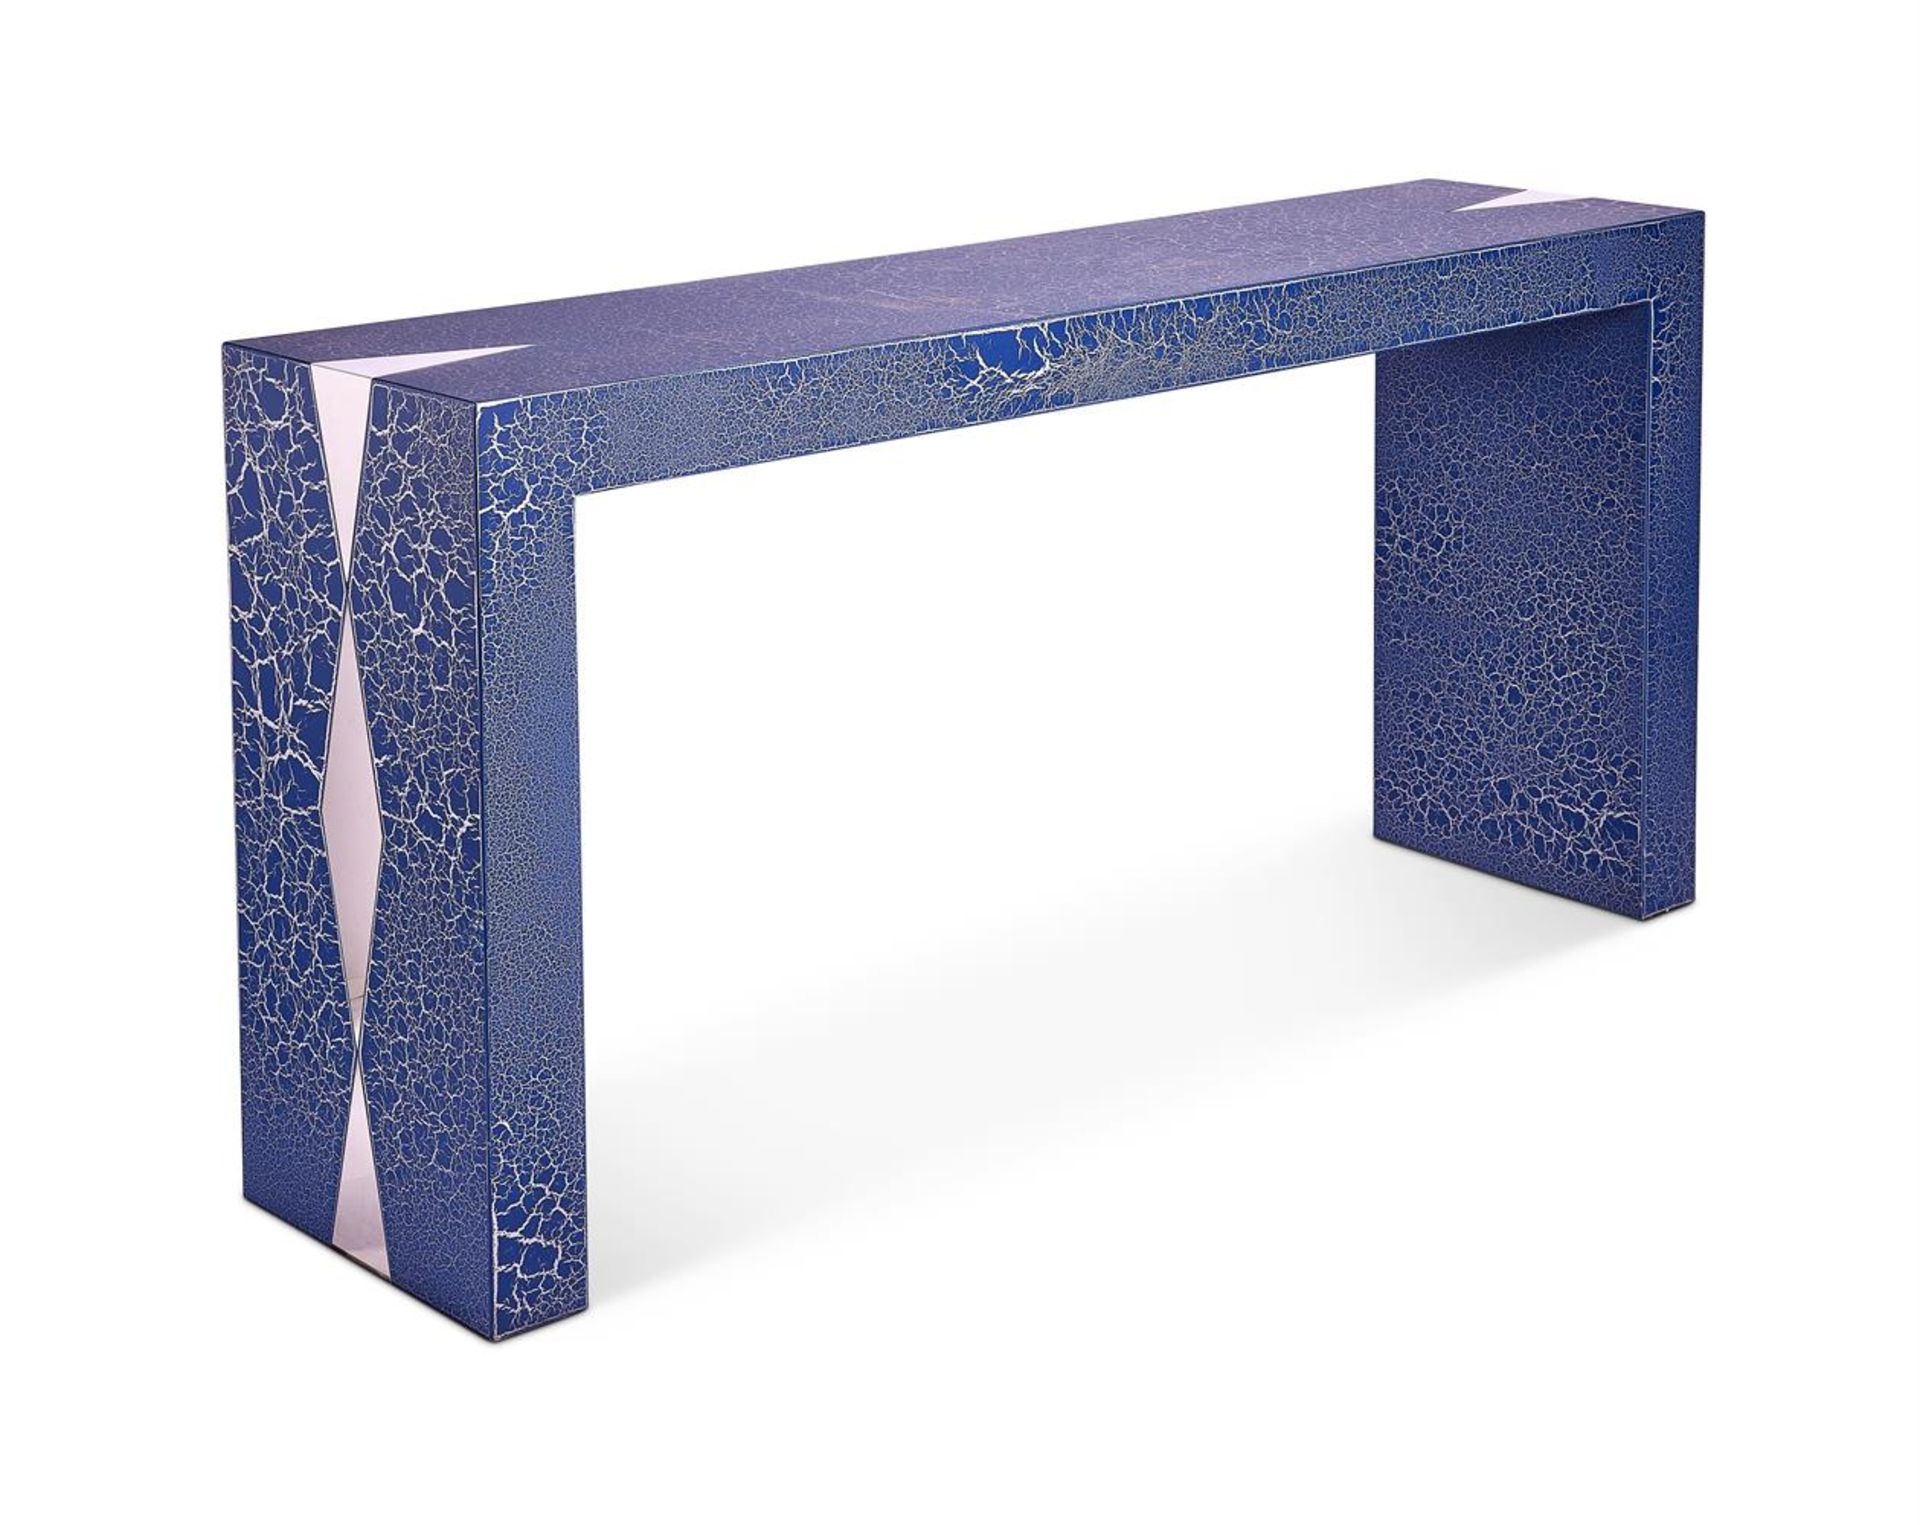 A 'COBALT' CRACKLE LACQUERED AND POLISHED STEEL CONSOLE TABLEBY KEN BOLAN